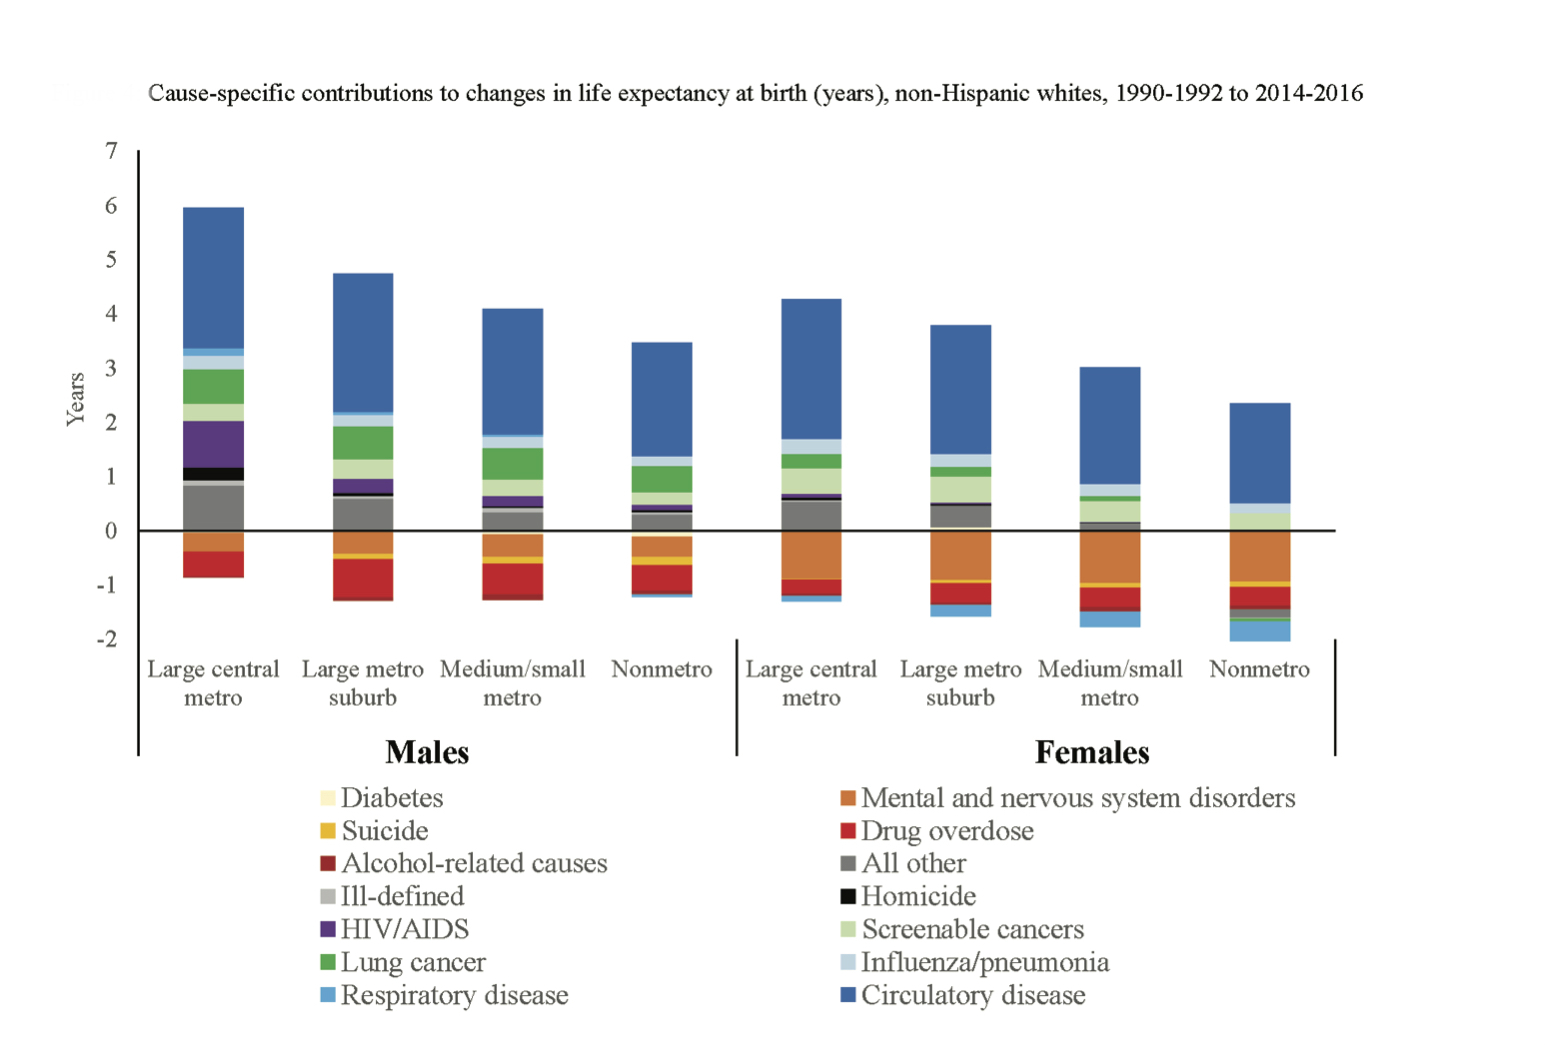 A bar graph with locality on the X-axis and years on the Y-axis. On the left show data for males in large central metro, large metro suburb, medium and small metro and nonmetro. On the right show the same data for females. The graph includes as causes of death diabetes, suicide, alcohol-related causes, ill-defined, HIV/AIDS, lung cancer, respiratory disease, mental and nervous system disorders, drug overdose, all other, homicide, screenable cancers, influenza/pneumonia, and circulatory disease. 